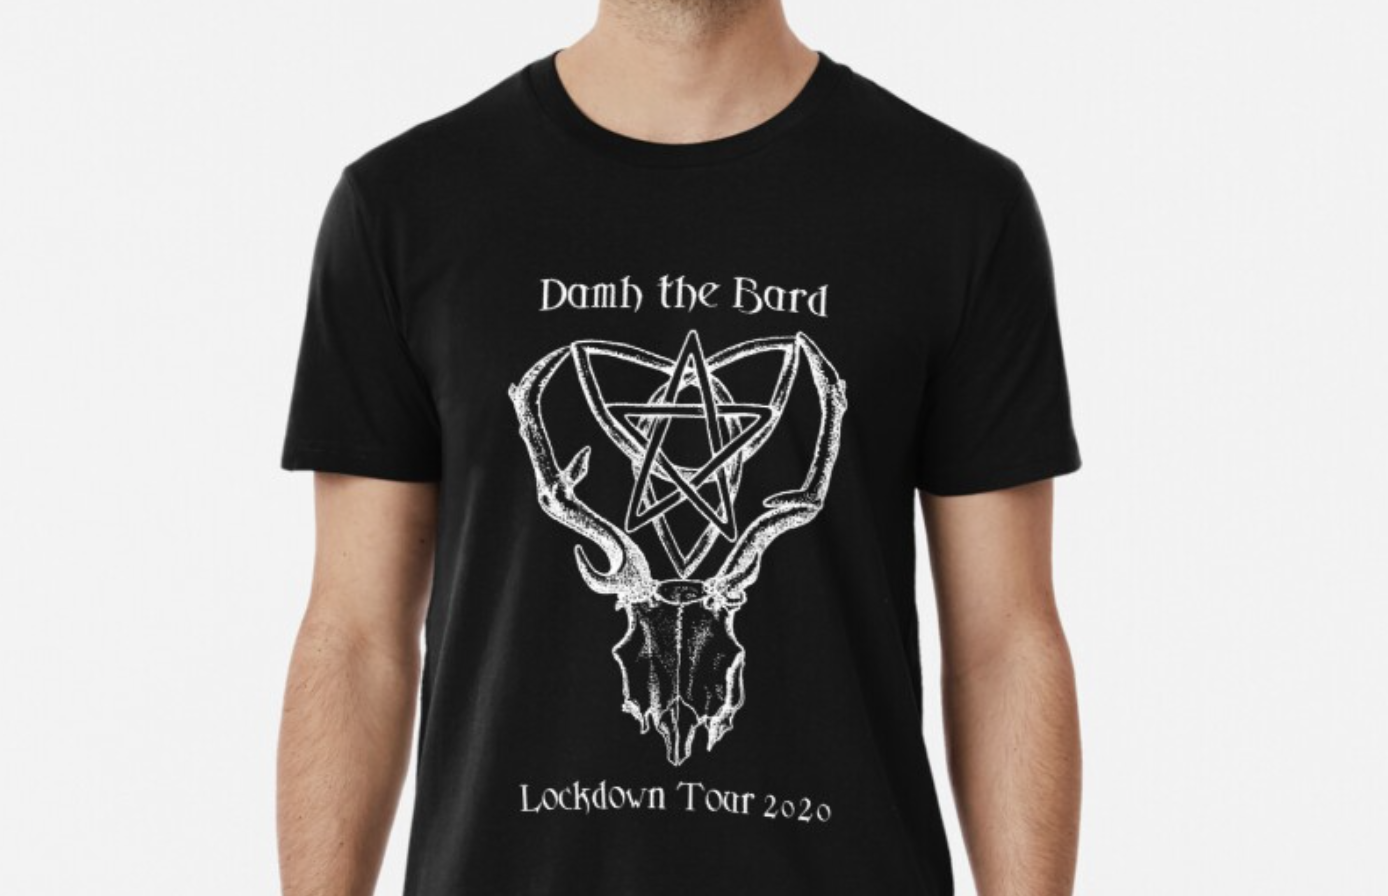 T-Shirts and Other Damh the Bard Merchandise 